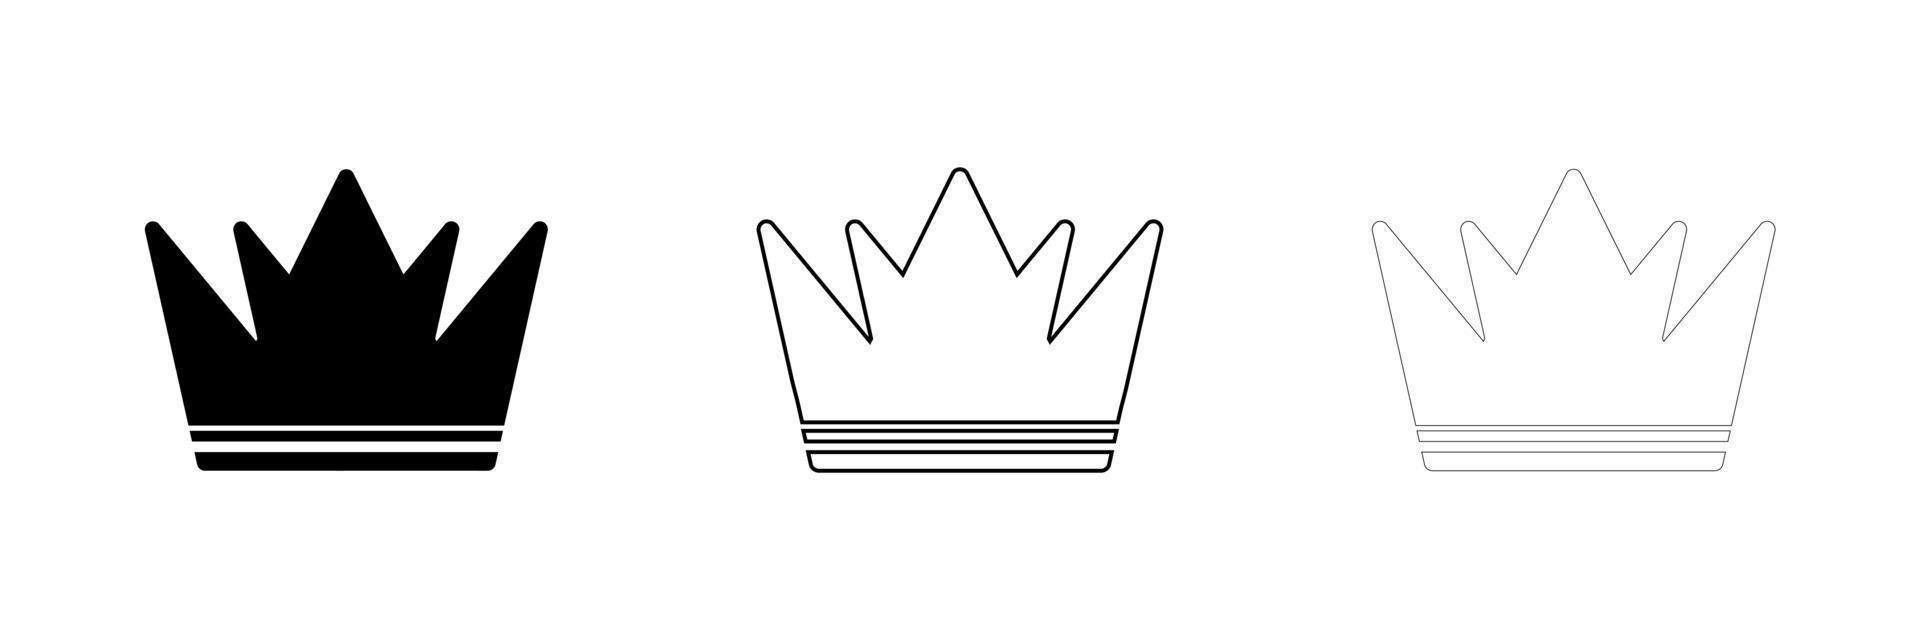 Modern Crown silhouette icon design template. Modern crown set in different thicknesses. Award icon on background for graphic and web design. Internet concept symbol for website button or mobile app. vector